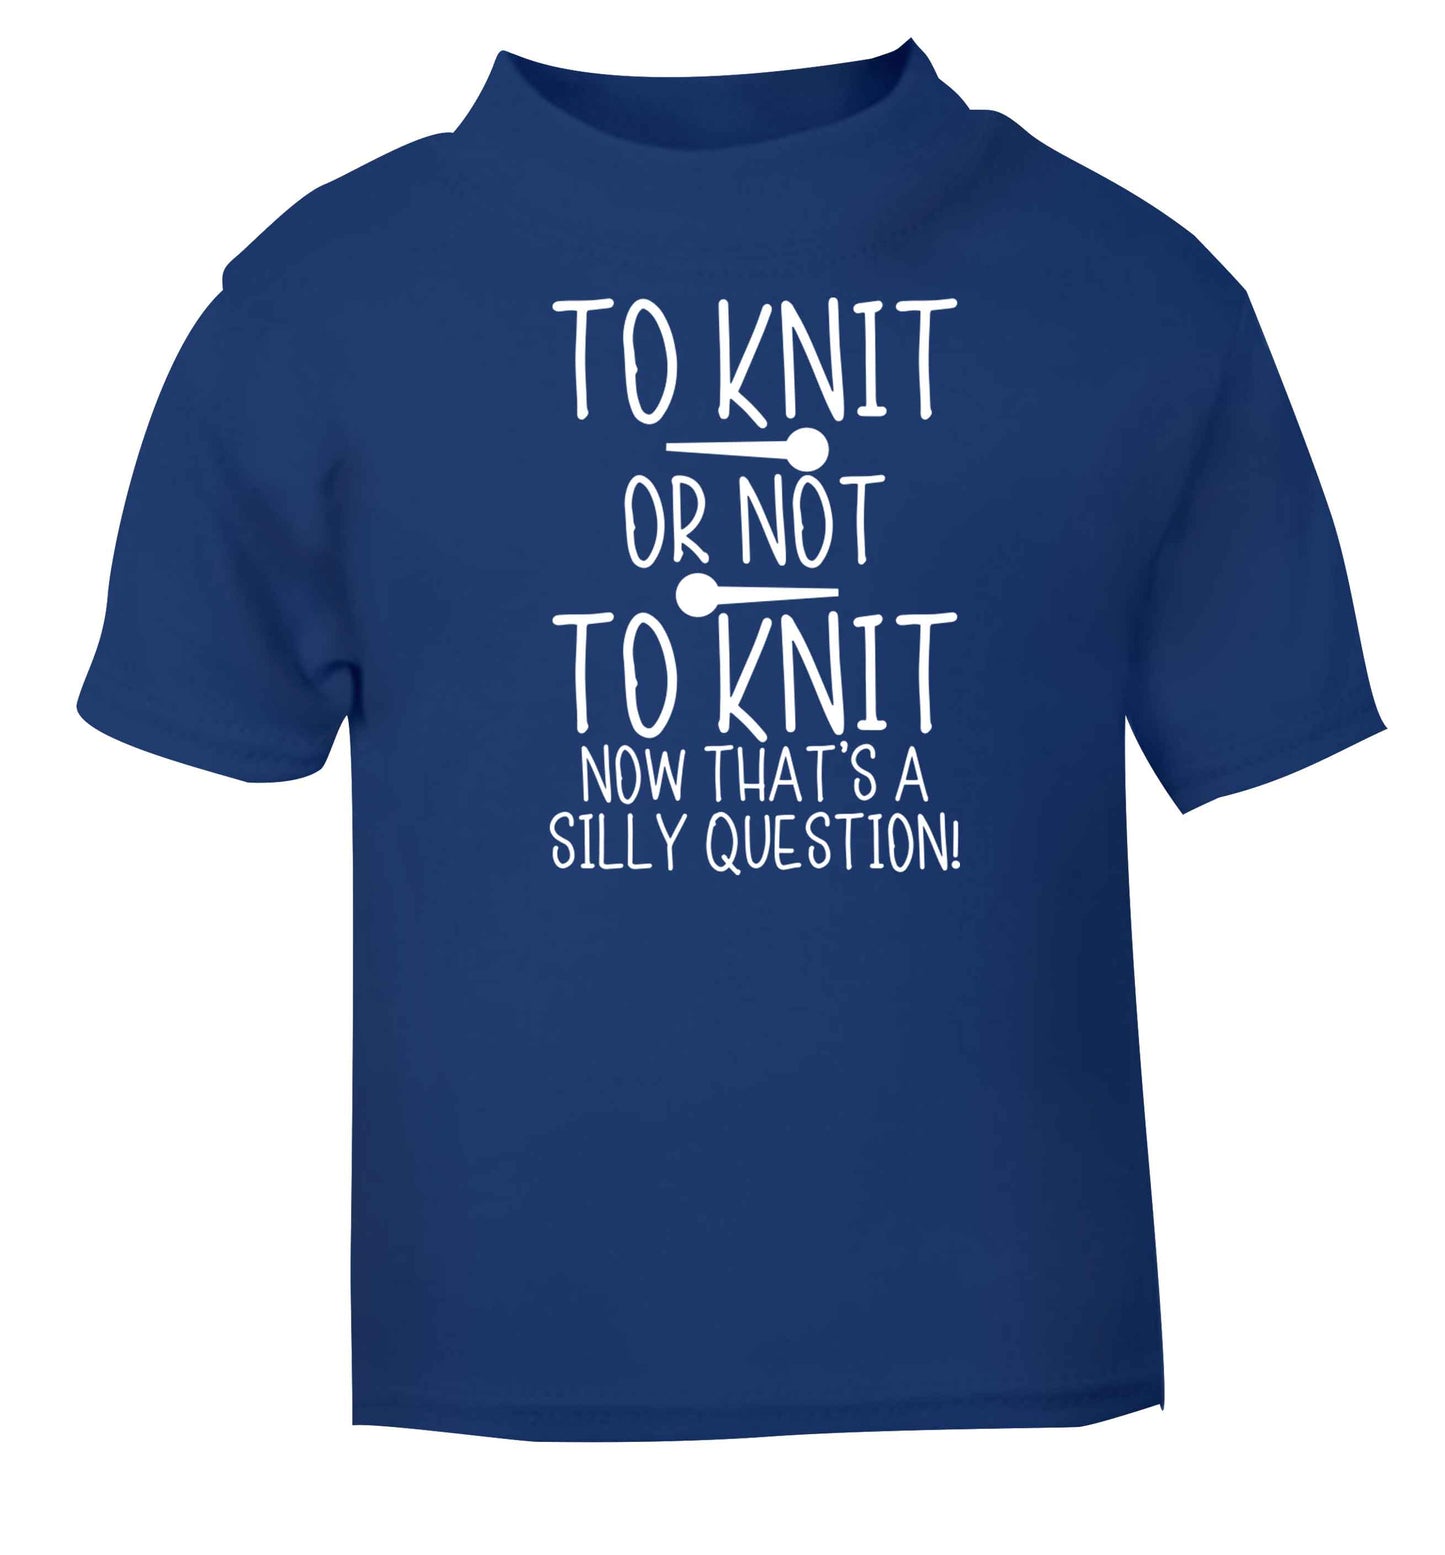 To knit or not to knit now that's a silly question blue baby toddler Tshirt 2 Years